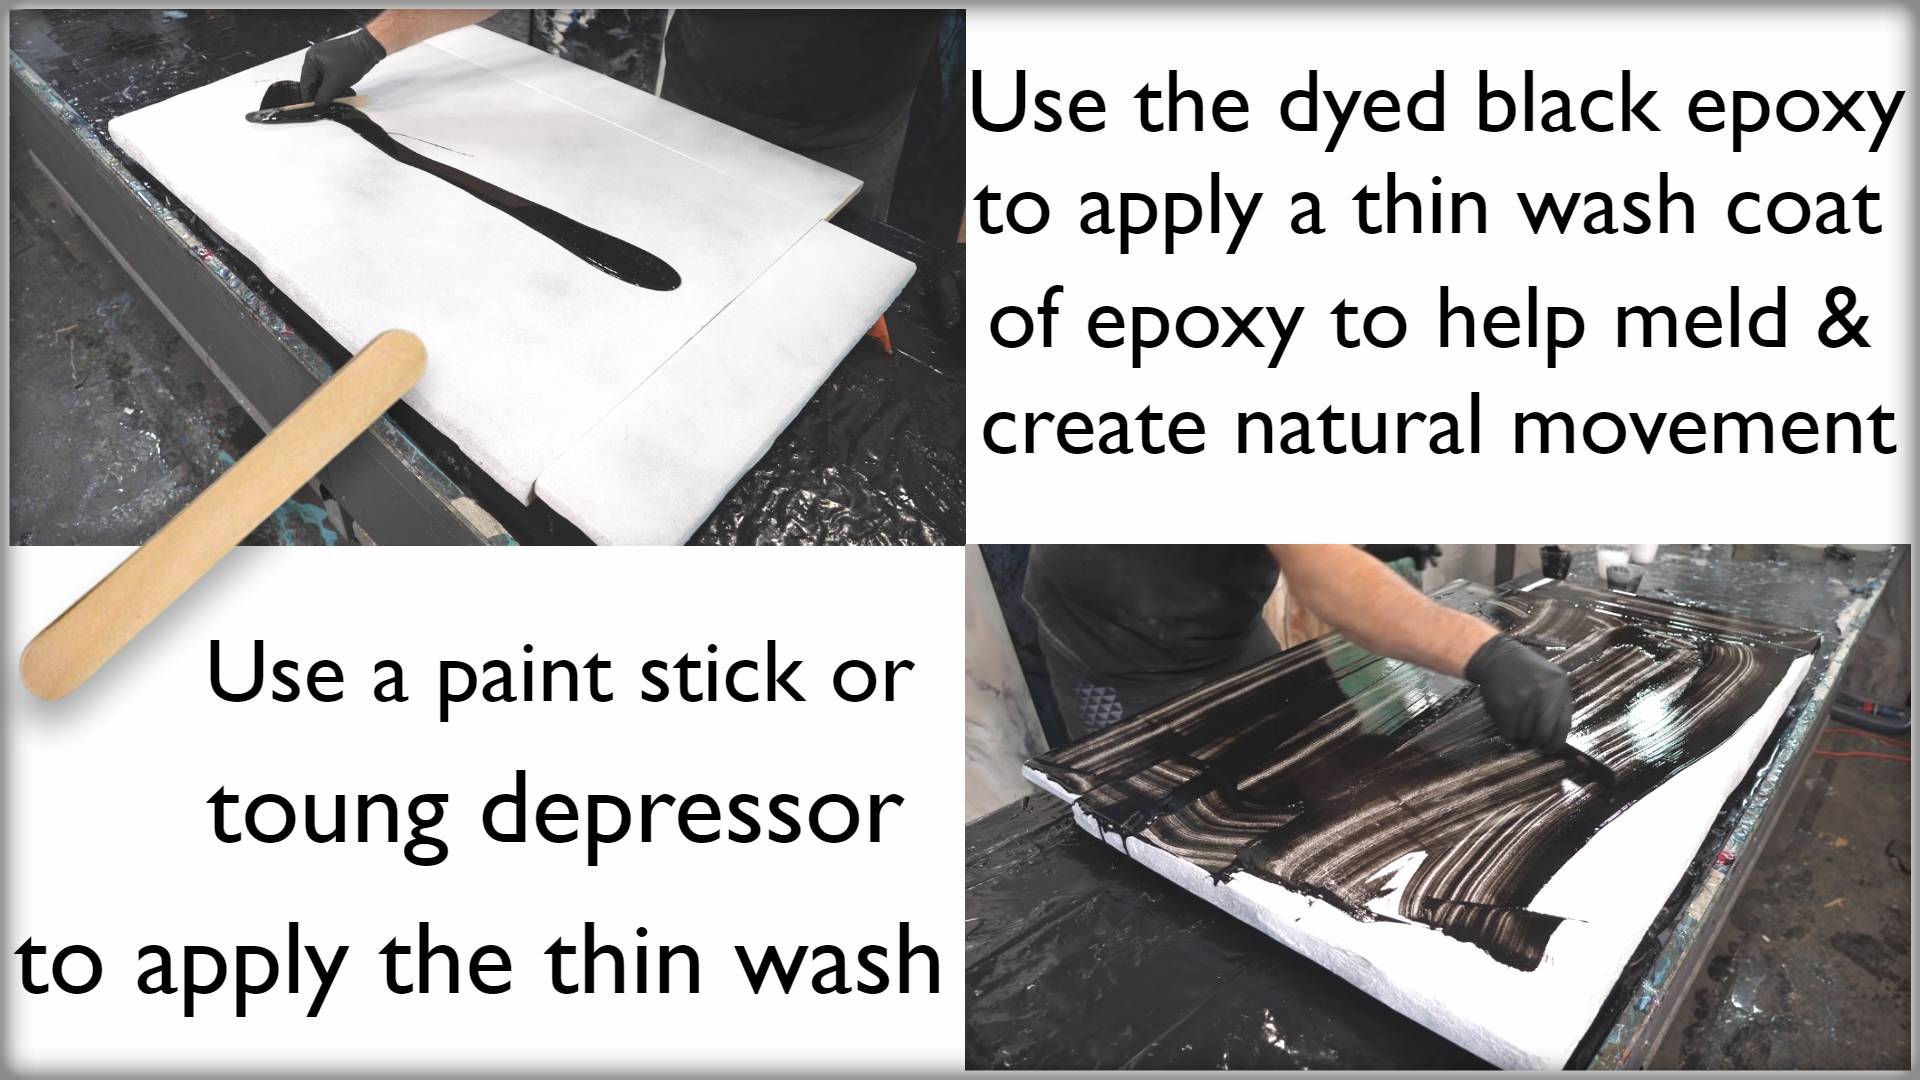 Use the dyed black epoxy to apply a thin wash coat to help meld and create natural movement. Apply it with a paint stick or tongue depressor.